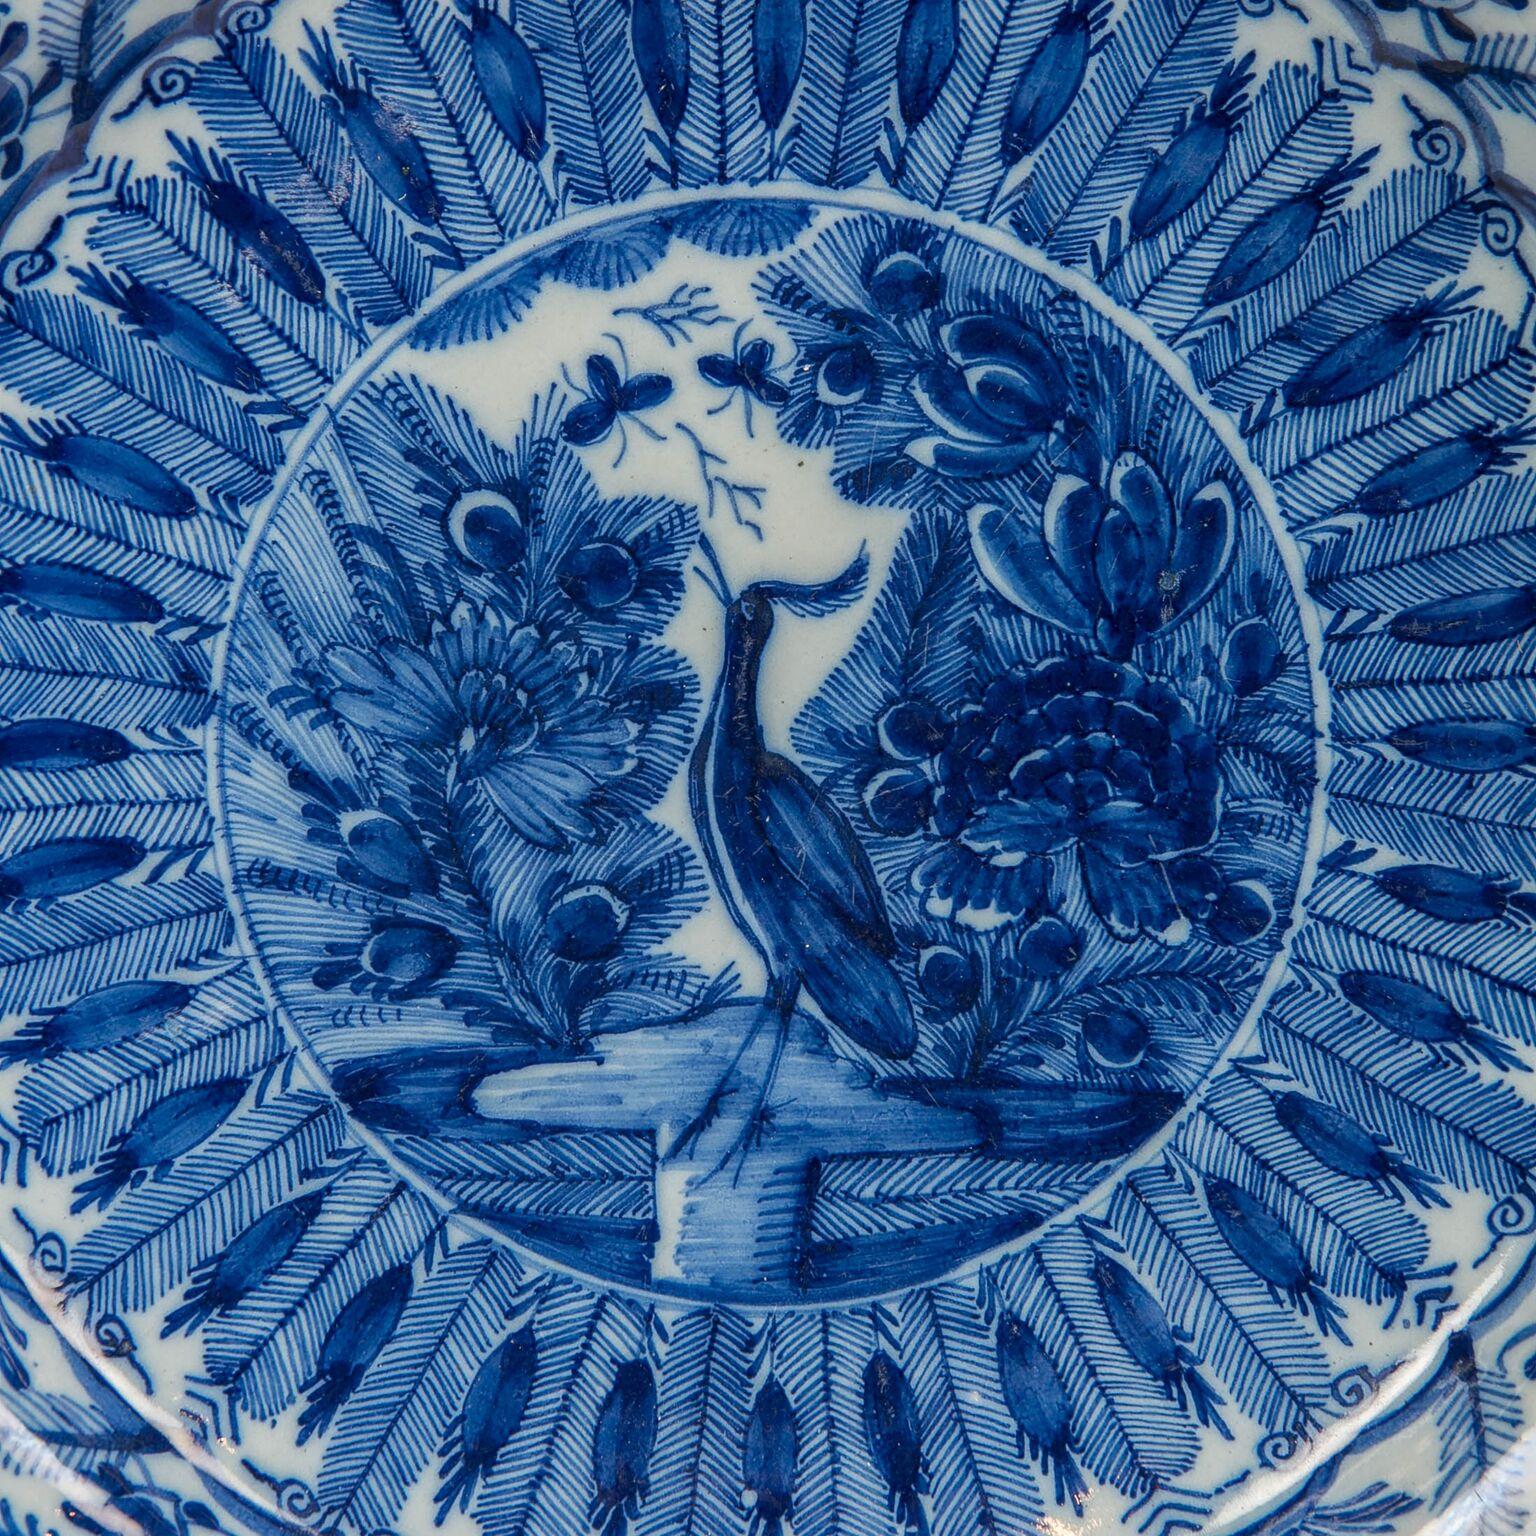 Provenance: A similar pair of chargers can be found in the collection of the Philadelphia Museum of Art, The Bloomfield collection 1882-773, 775.
We are proud to offer this outstanding Dutch Delft blue and white charger made by The Claw factory